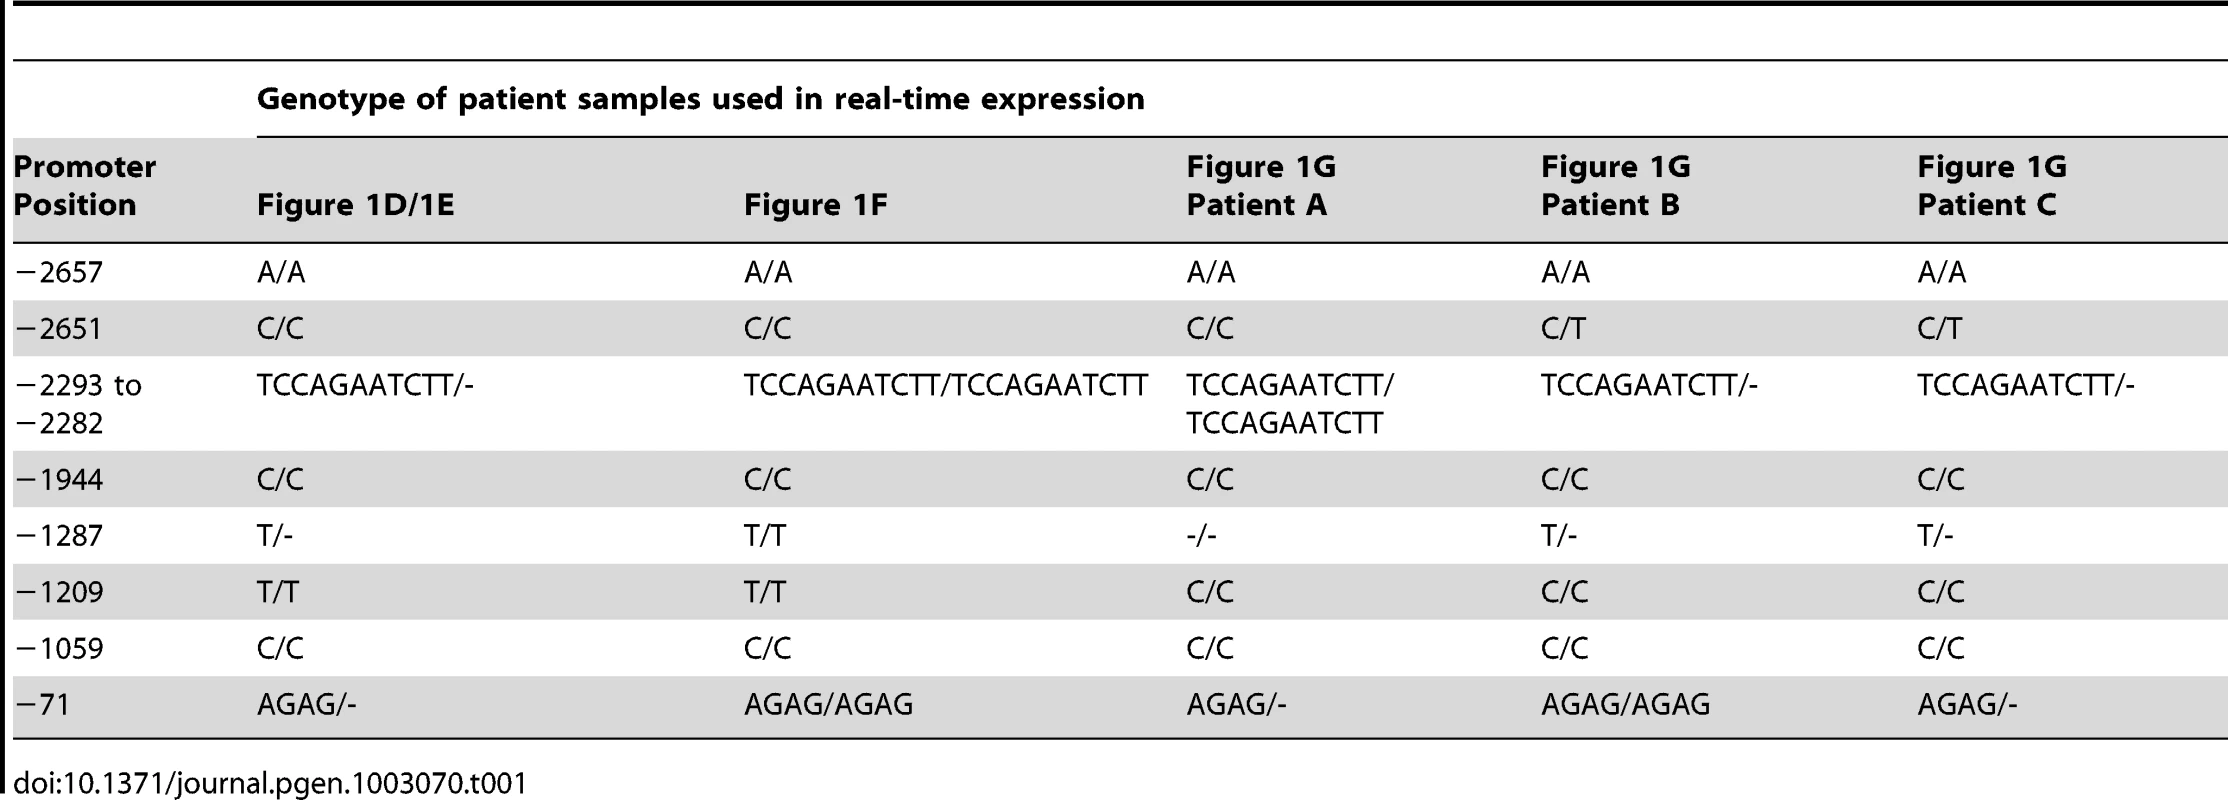 Genotypes of BEEC patient samples used in real-time expression experiments.